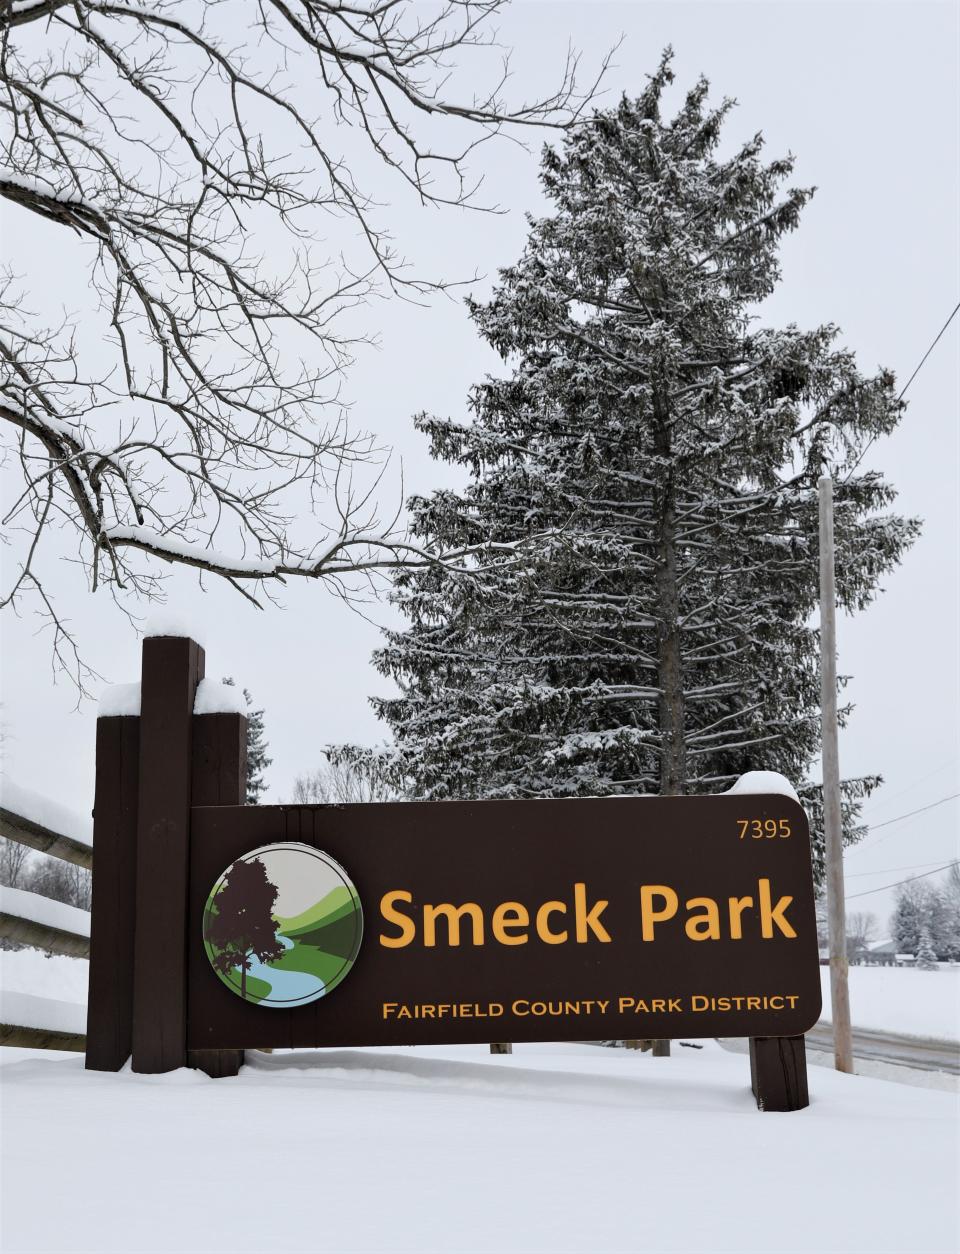 Smeck Park was covered in snow Feb. 9 after Fairfield County received 4 inches of snow overnight.